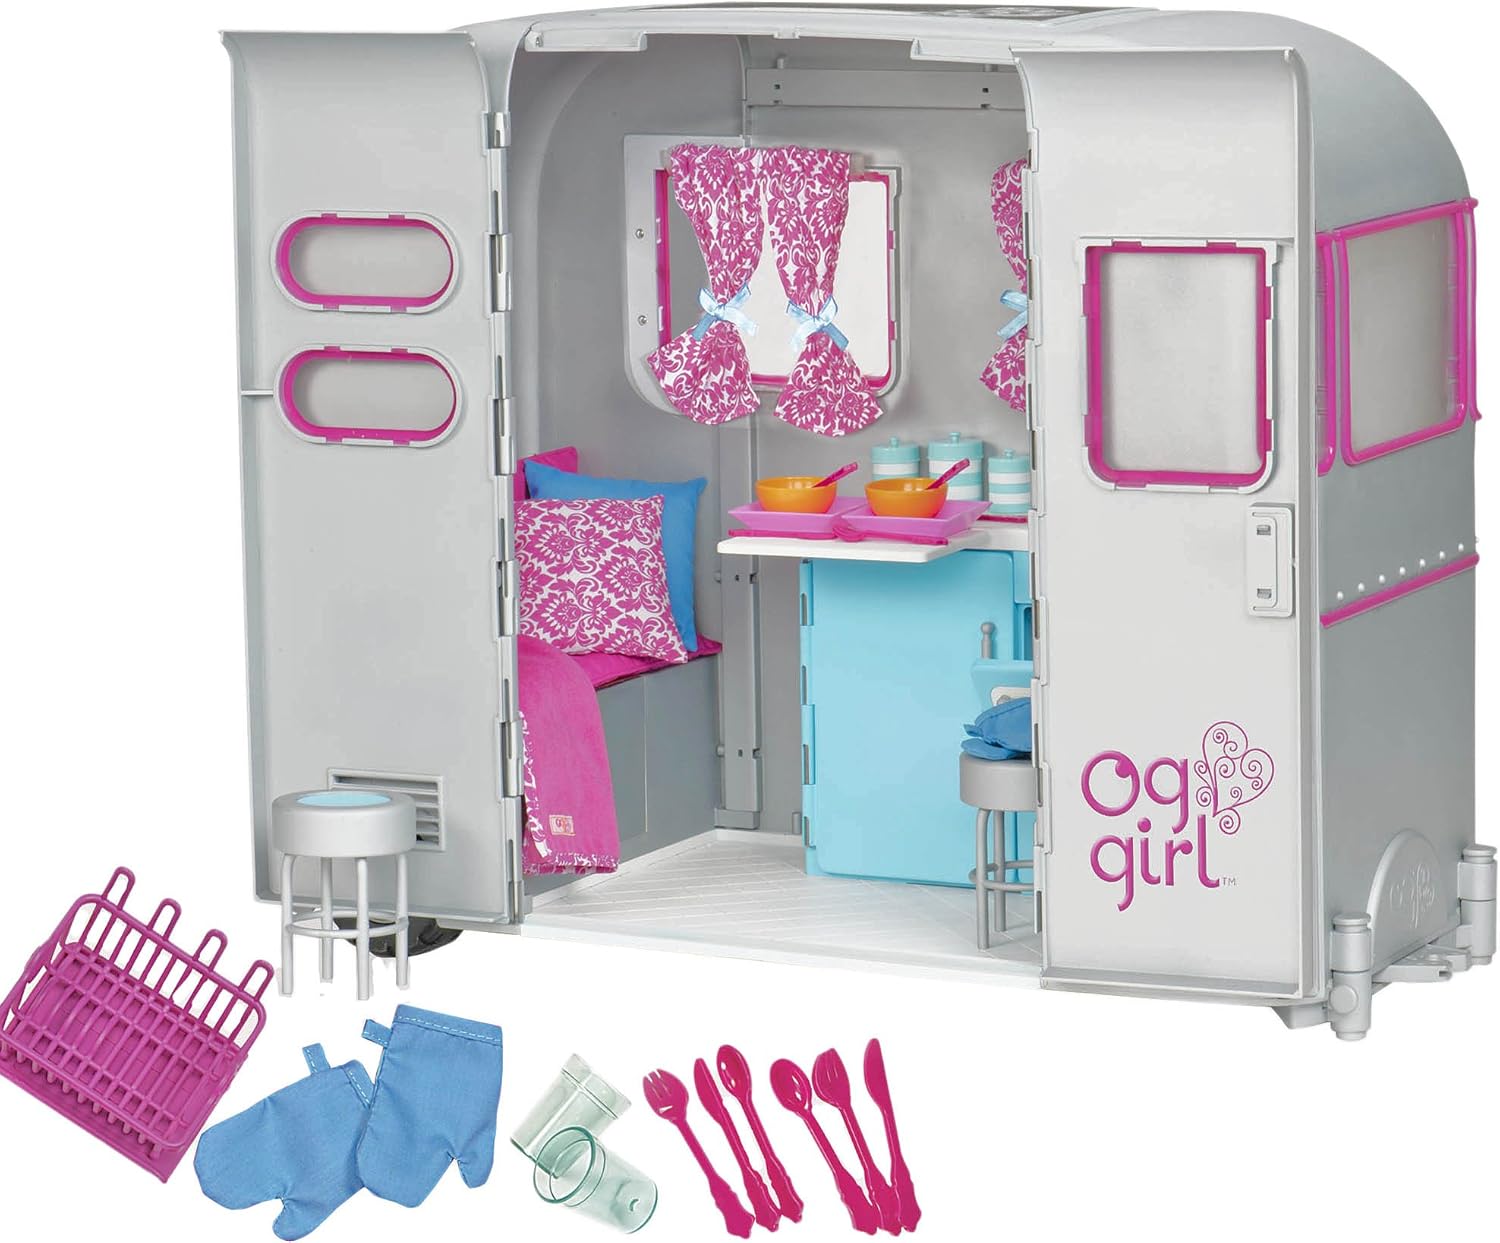 Our Generation, R.V. Seeing You Camper Trailer Playset for 18-inch Dolls